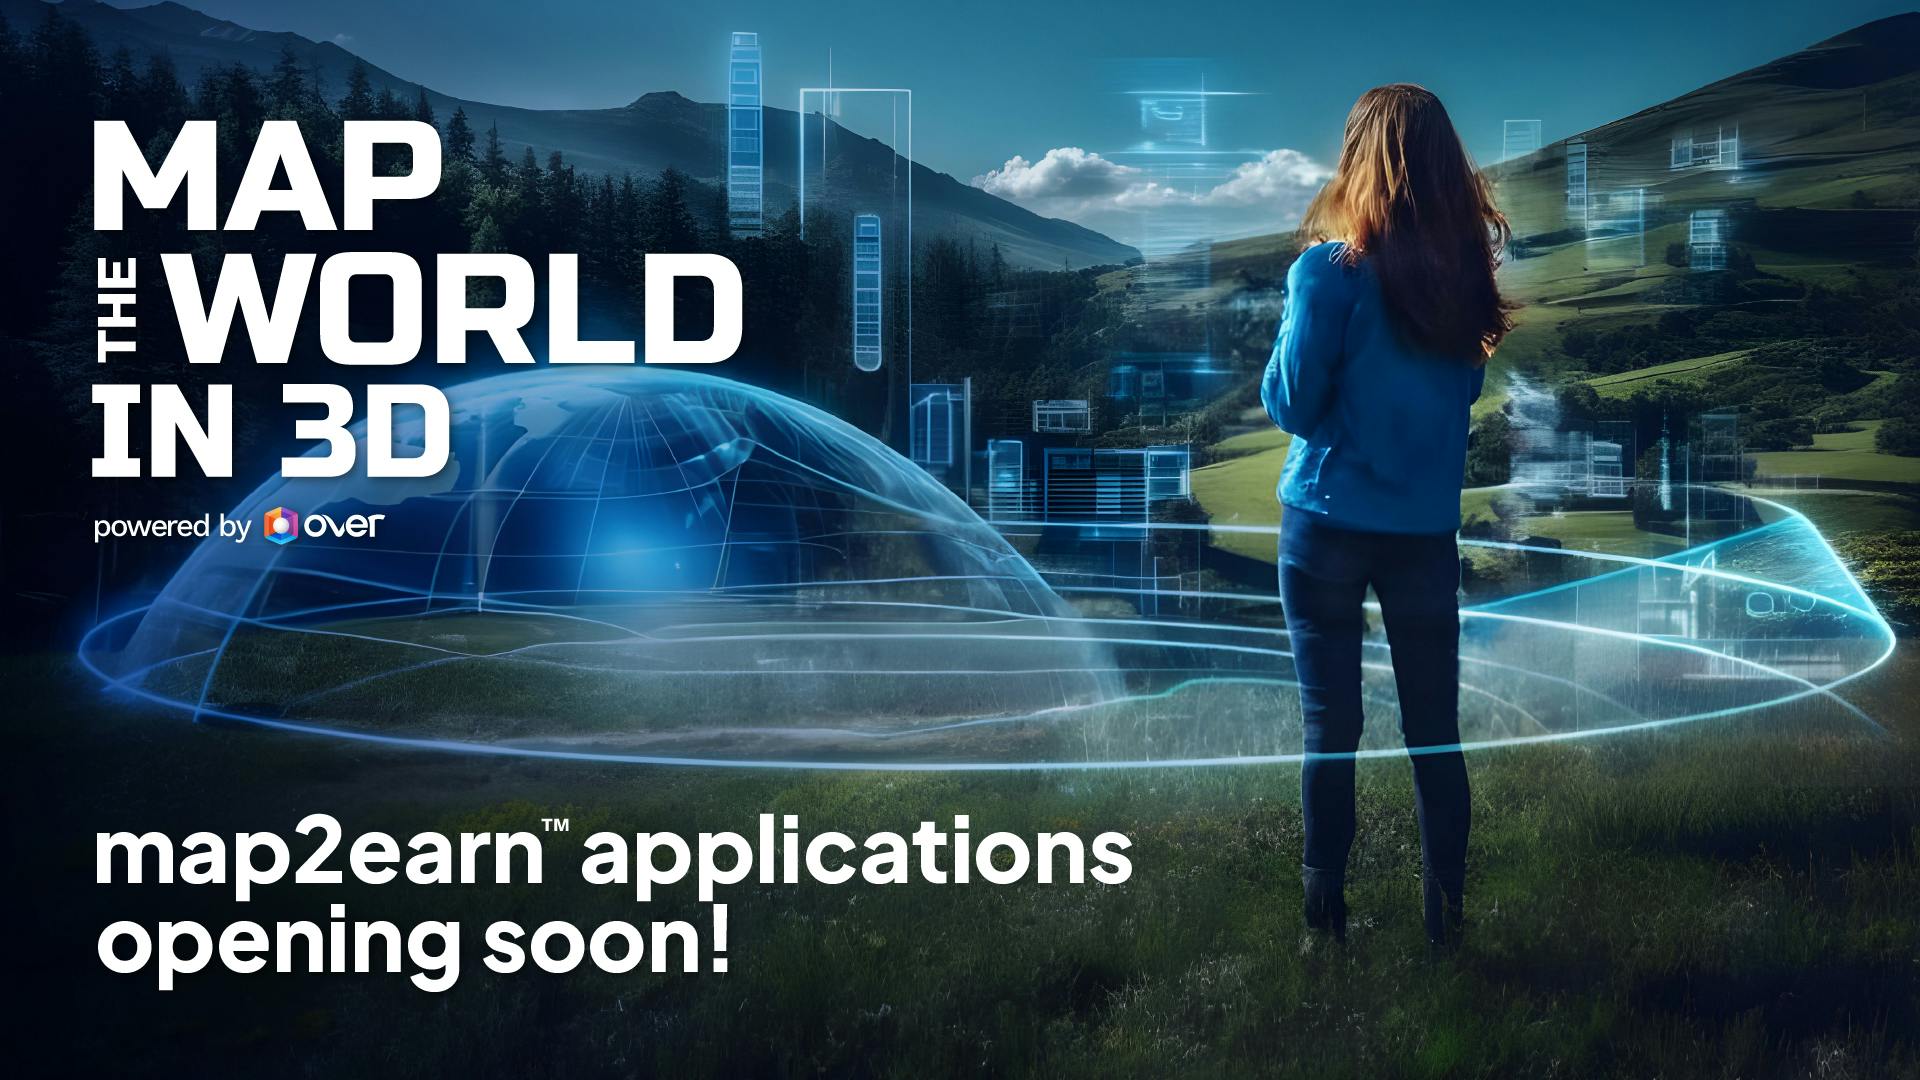 Apply to Map The World in 3D – coming November 6!